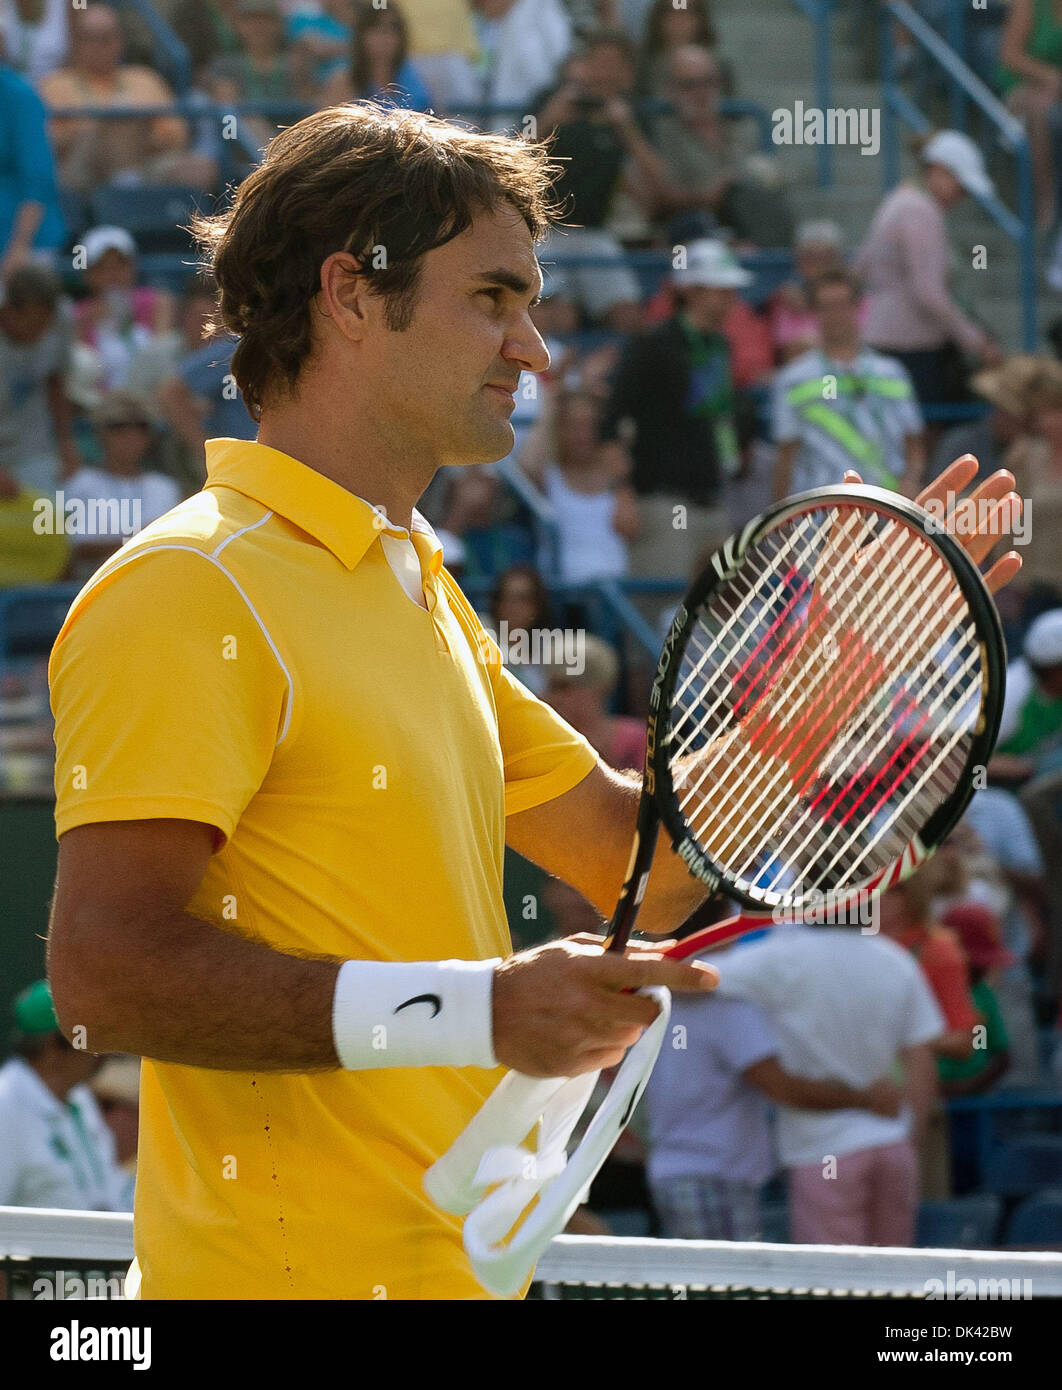 Mar. 18, 2011 - Indian Wells, California, U.S. - No. 2 seed ROGER FEDERER  (SUI) acknowledges the crowd during the men's quarterfinals match of the  2011 BNP Paribas Open held at the